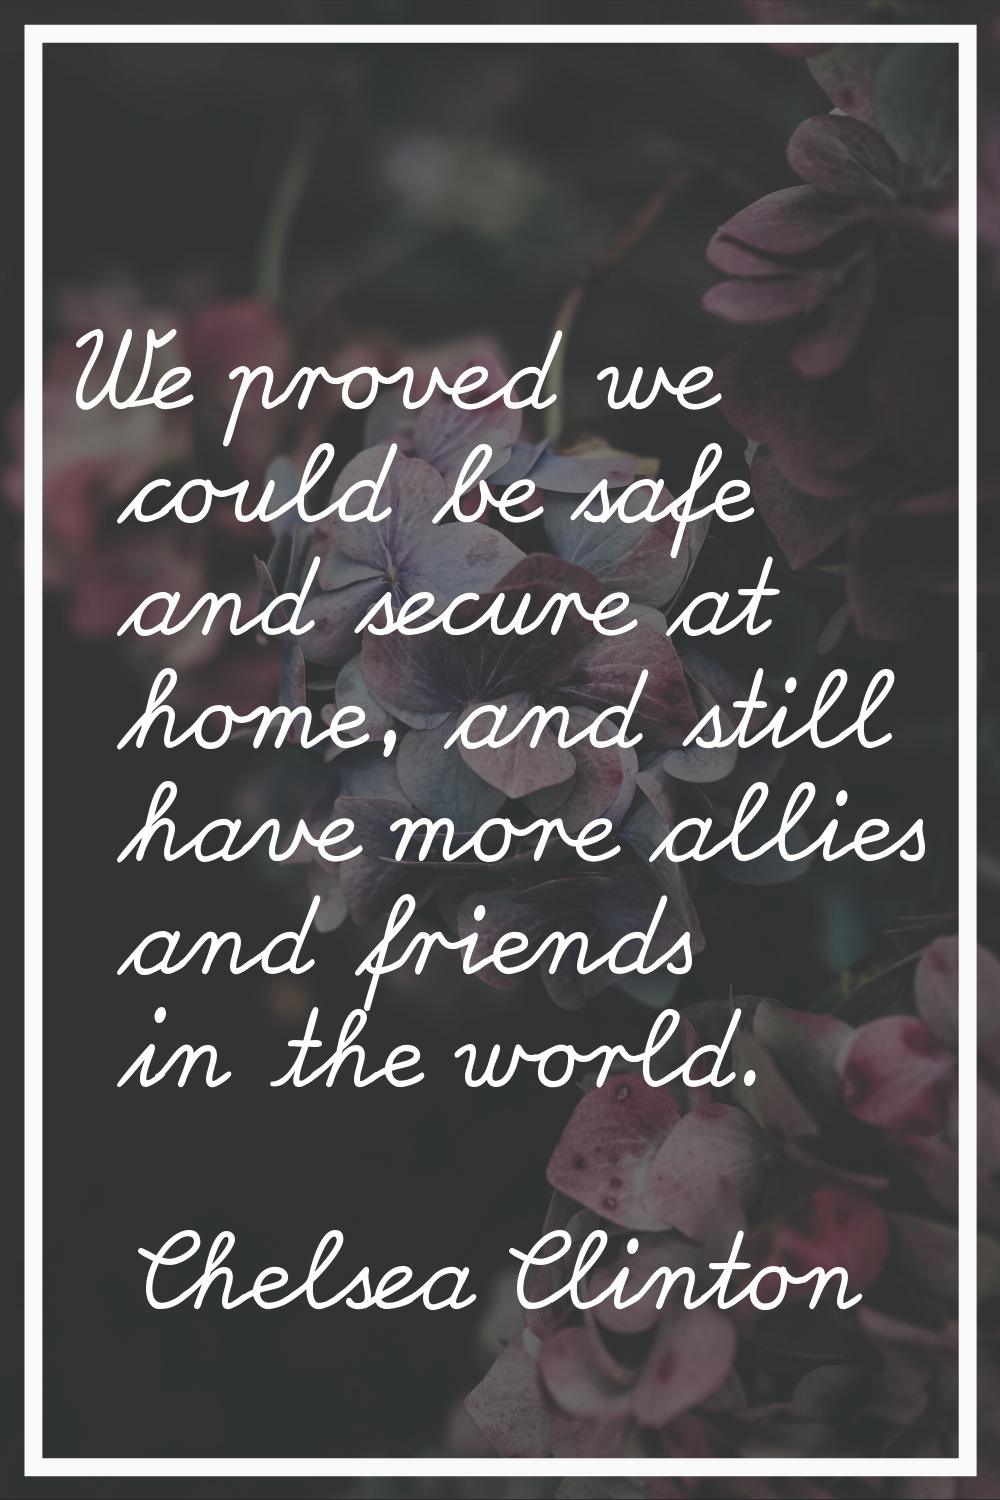 We proved we could be safe and secure at home, and still have more allies and friends in the world.